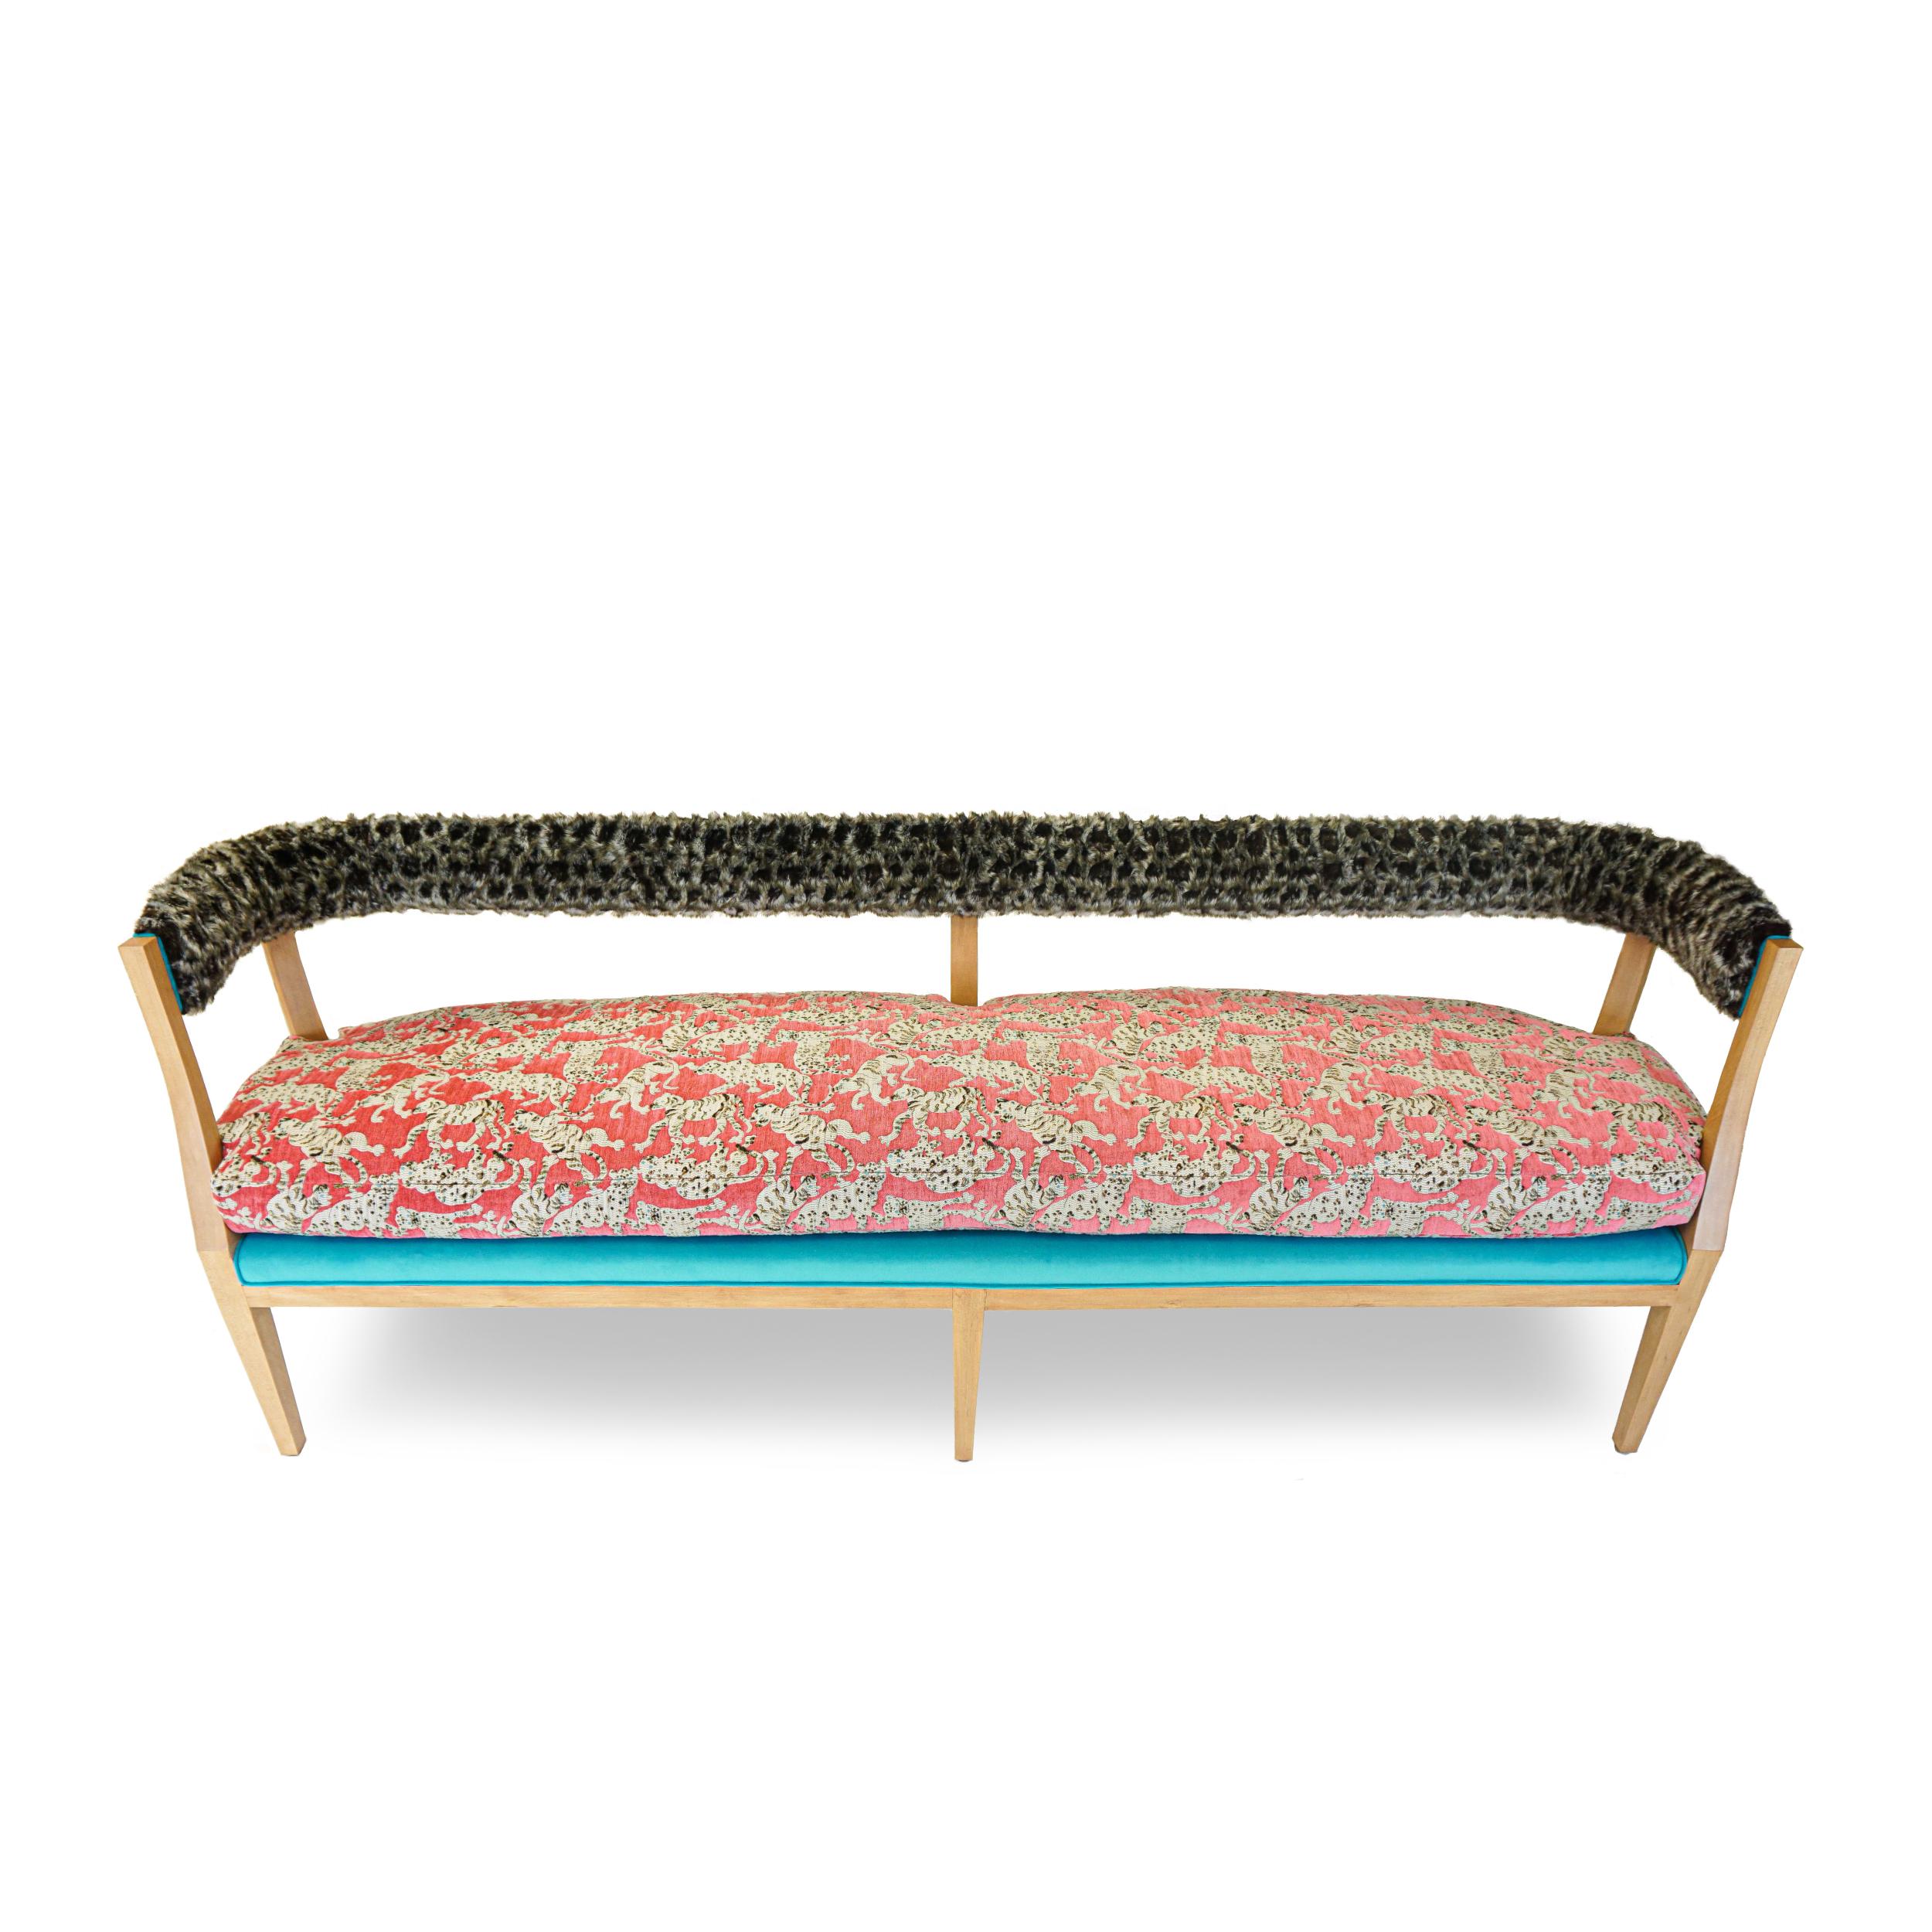 Modern Japanese Inspired Bench with Wild Cat Print and Faux Fur For Sale